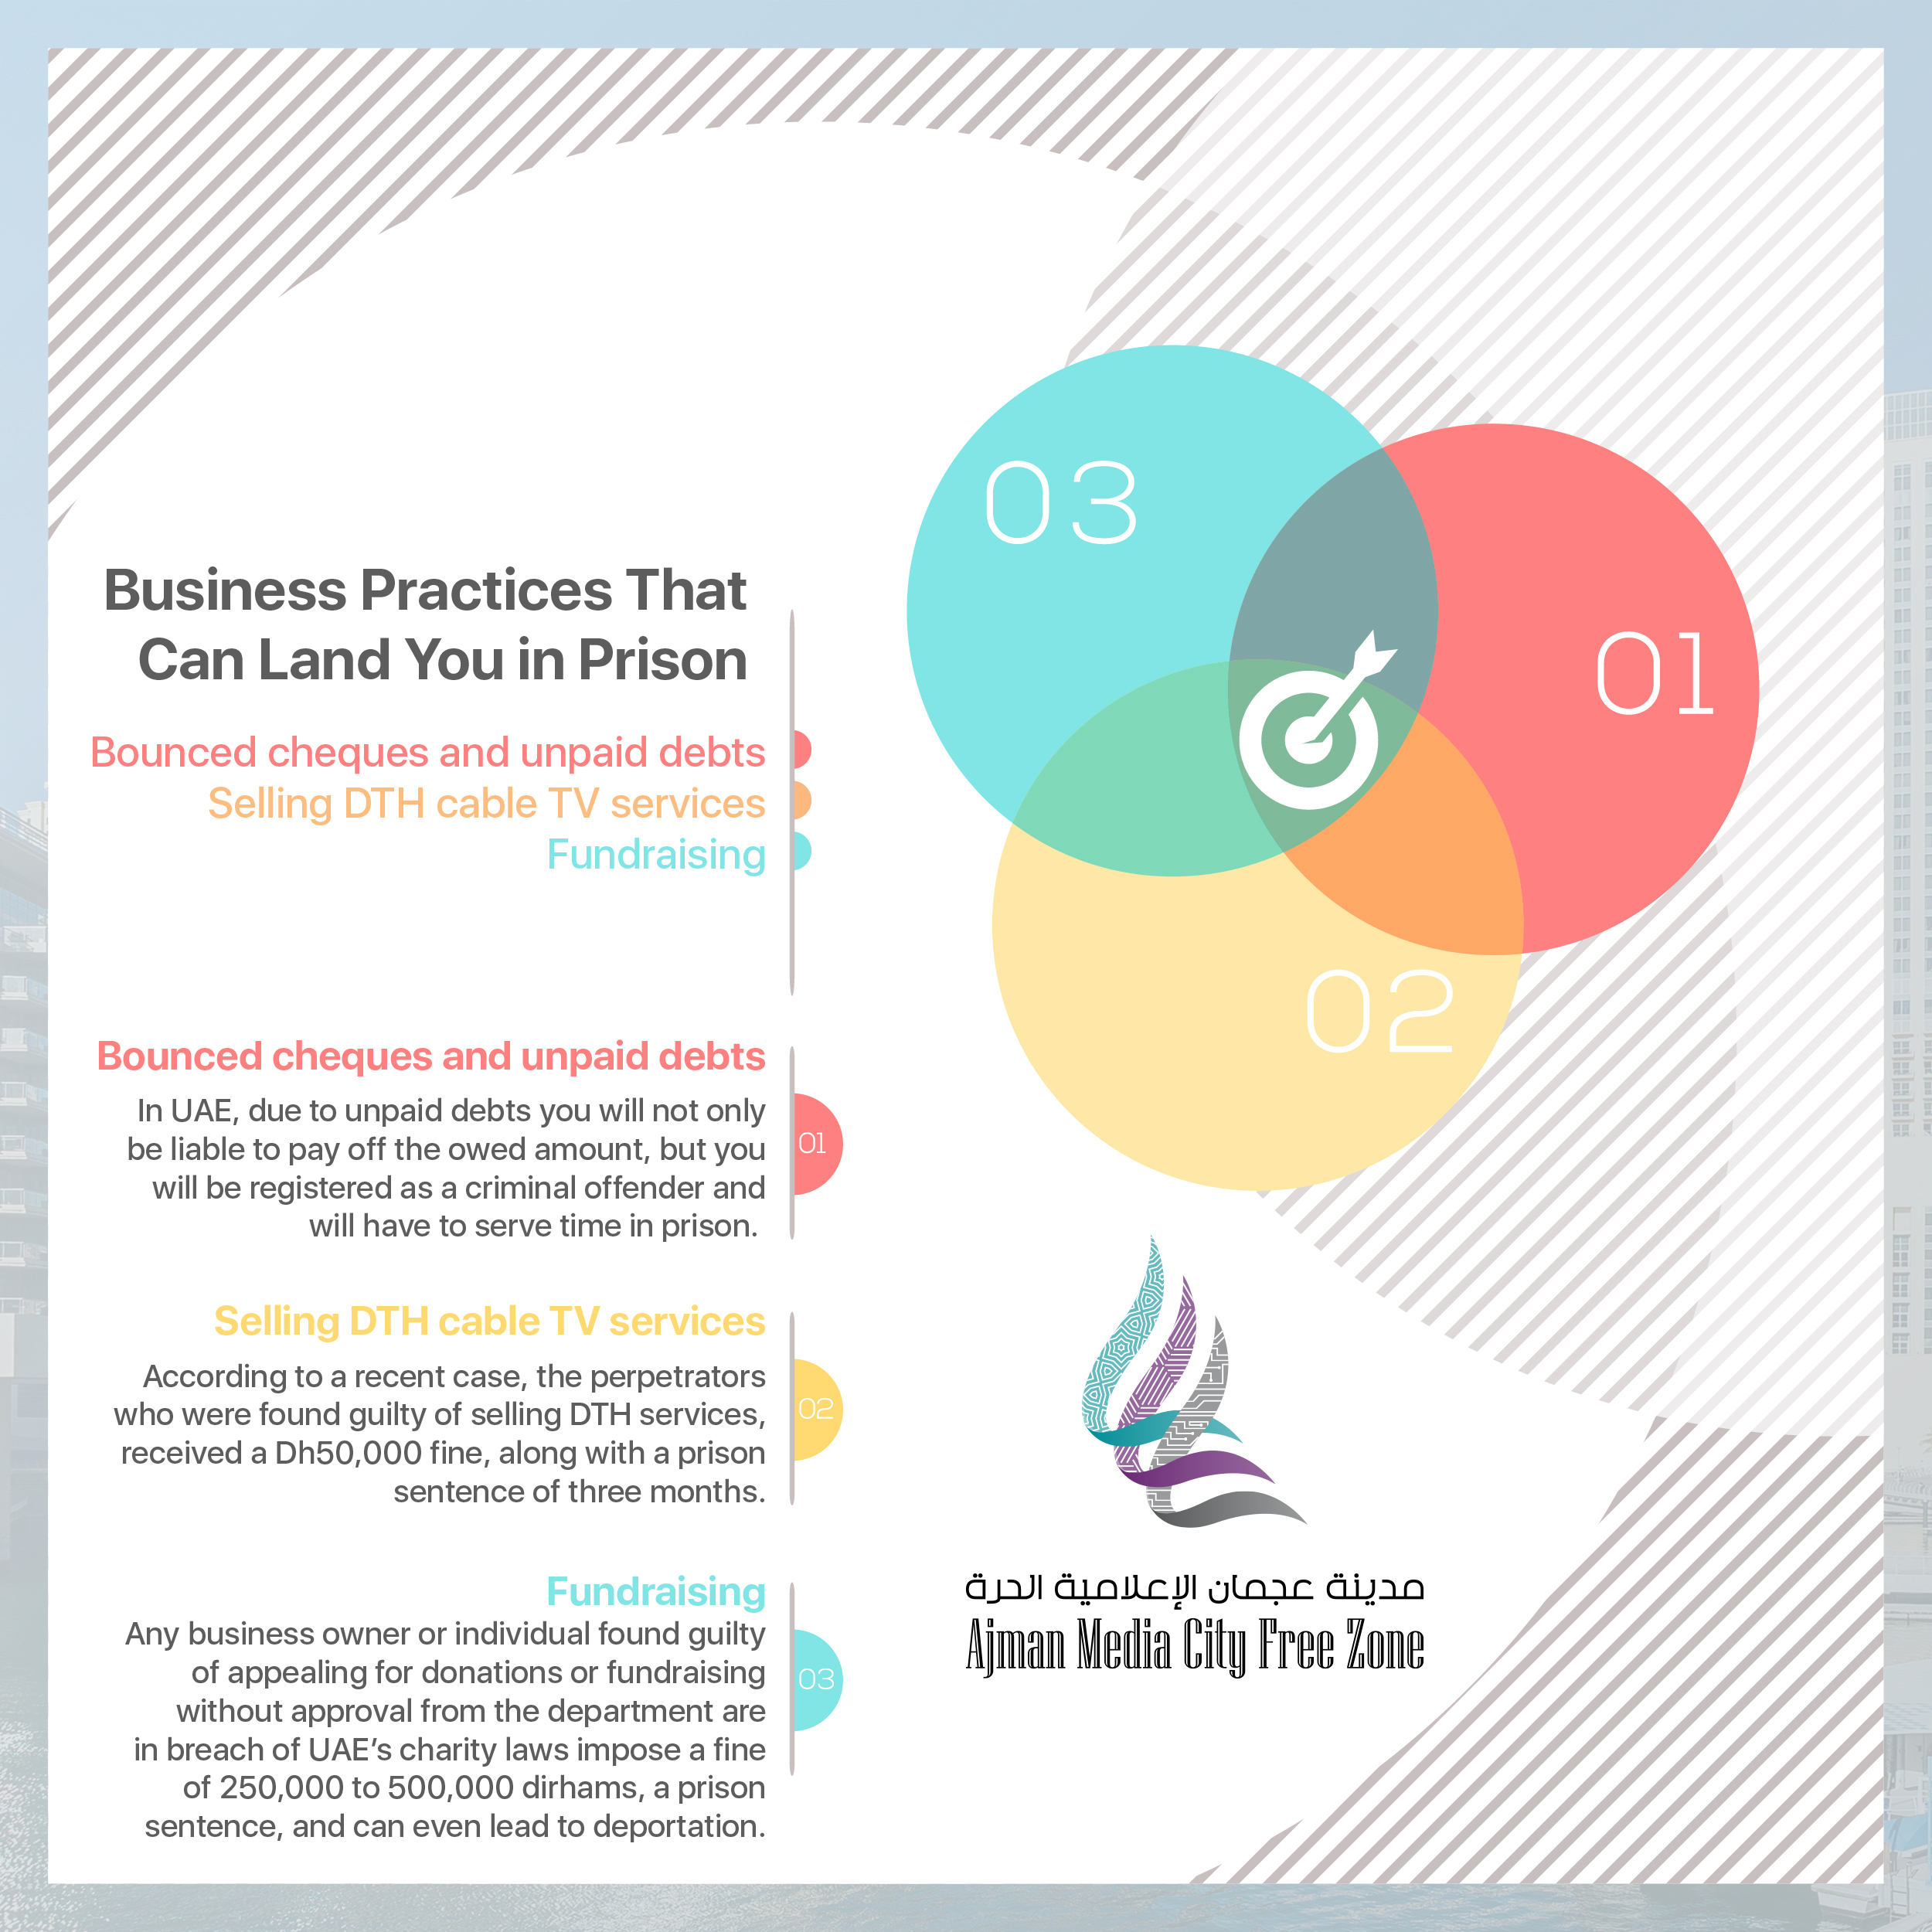 Business Practices That Can Land You in Prison